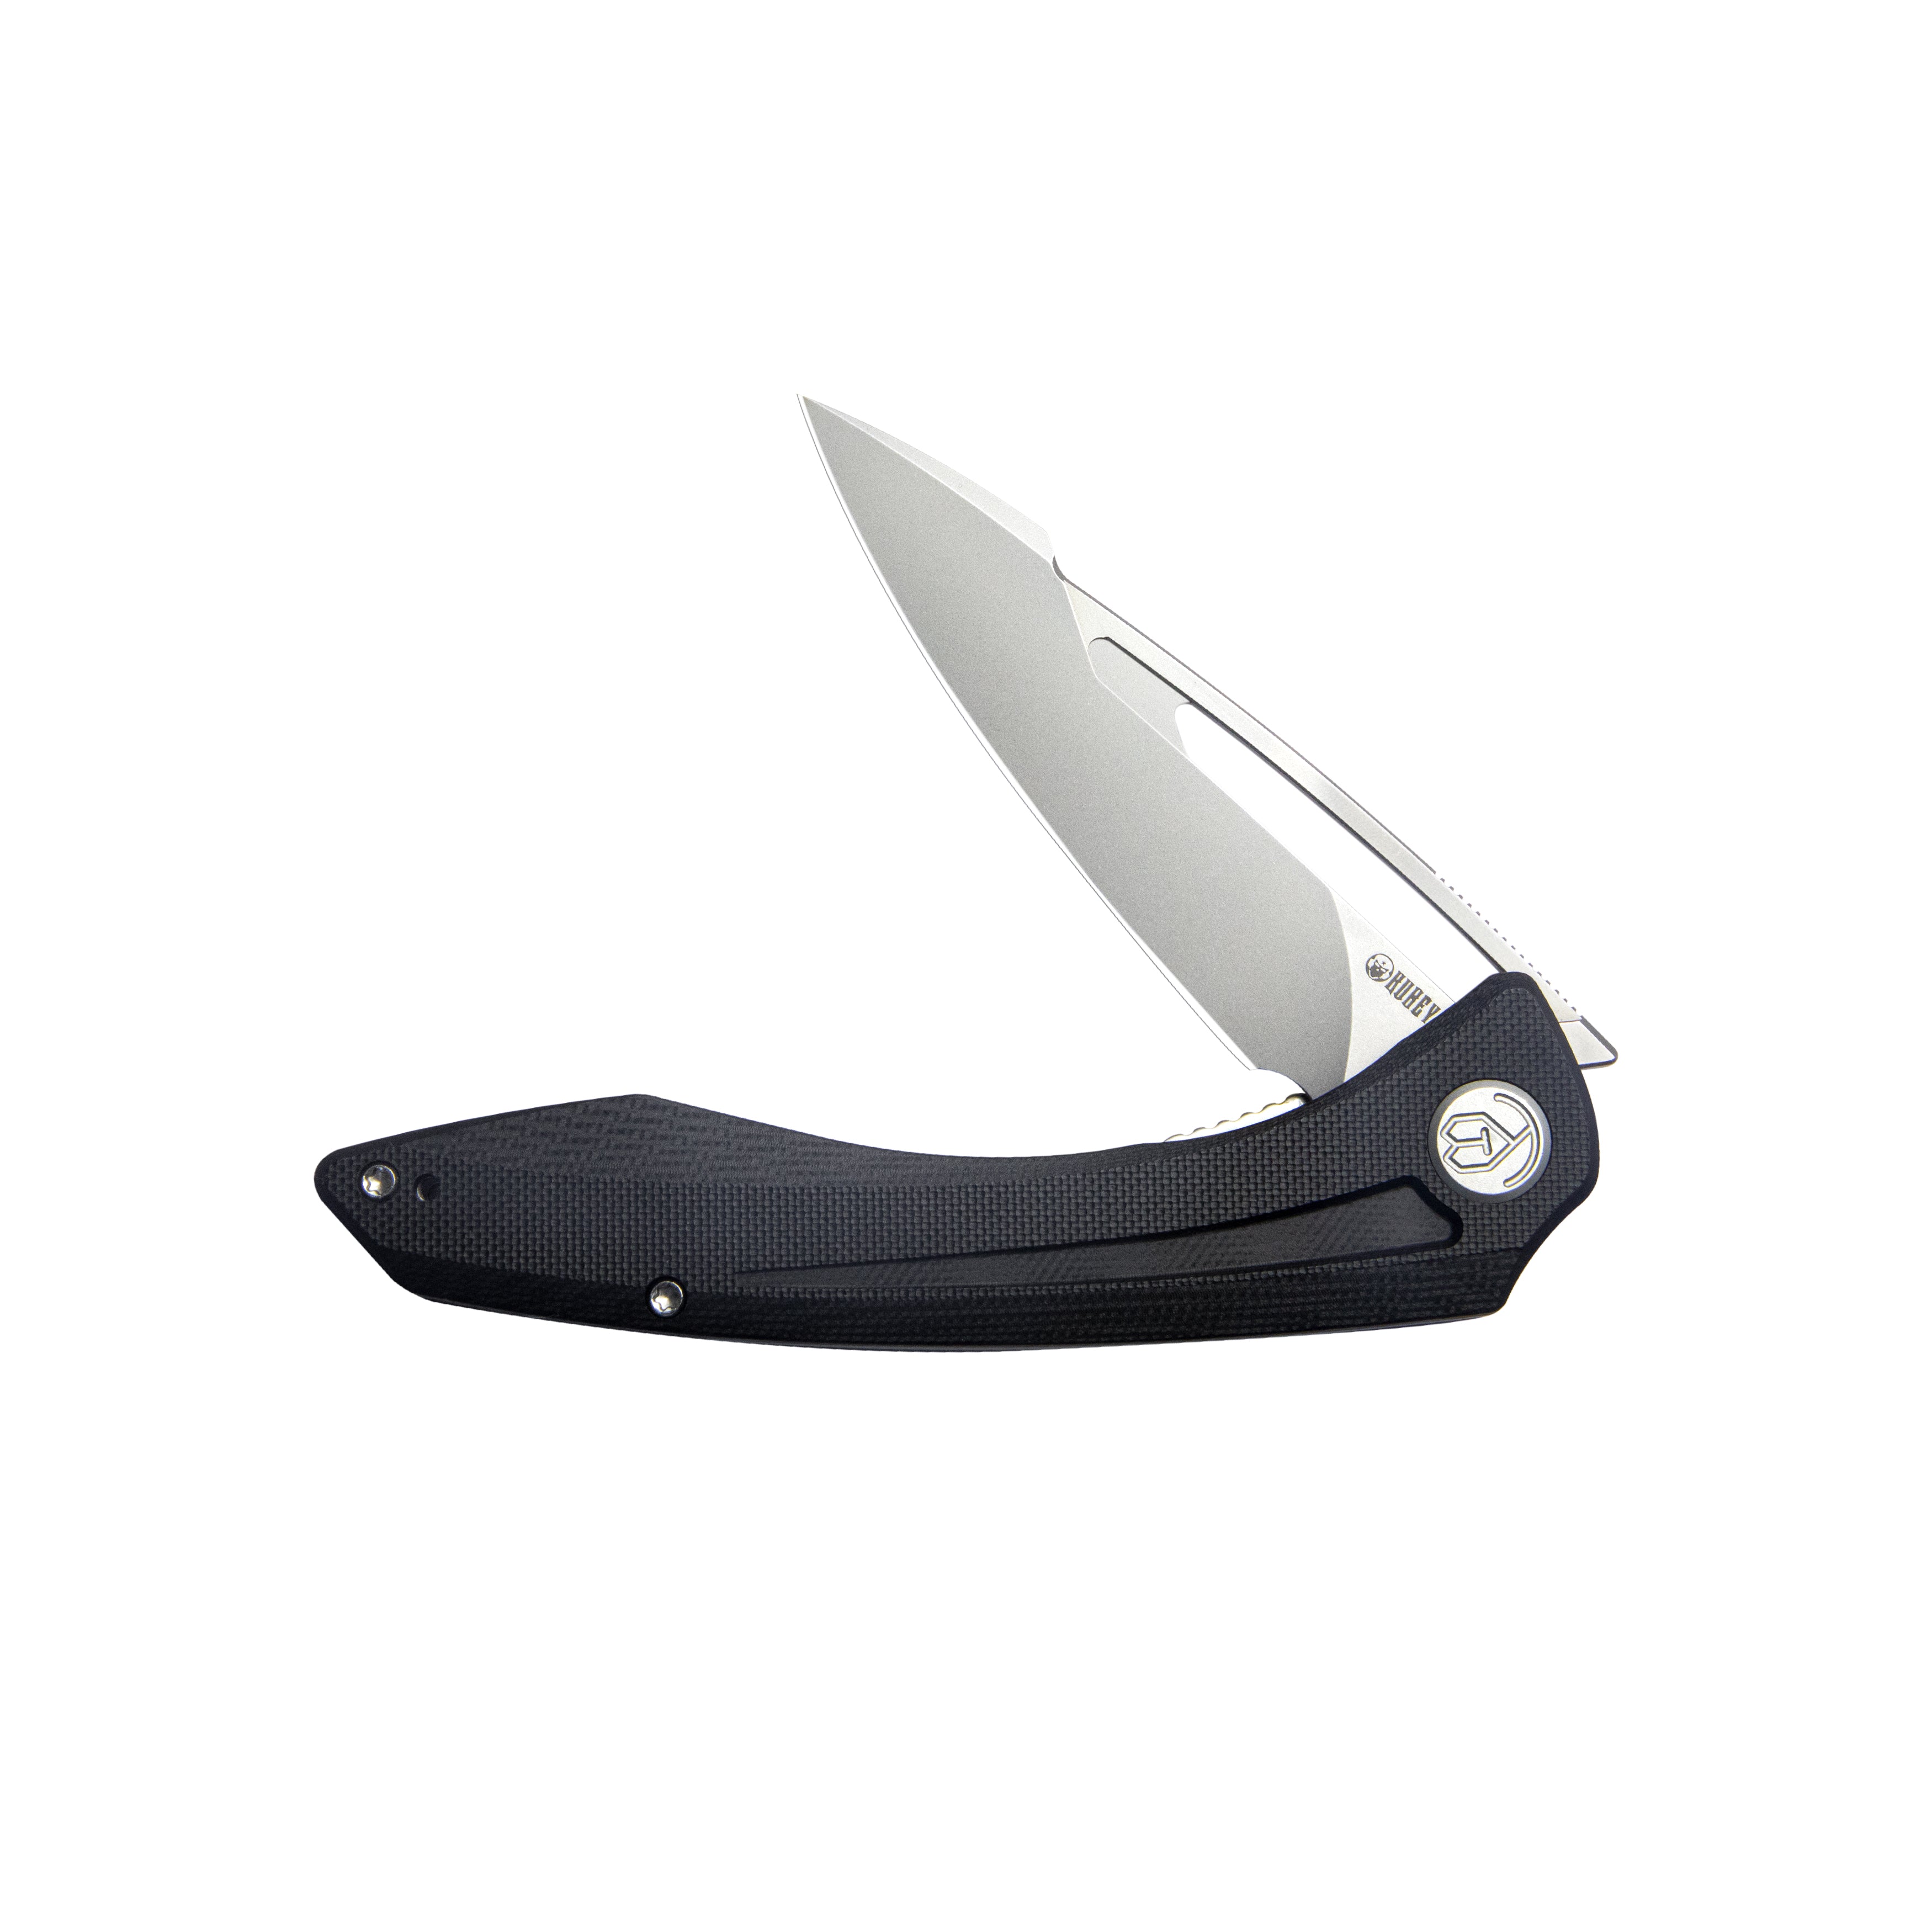 Kubey Merced Klappmesser Folding Knife 3.46" Beadblasted AUS-10 Blade With Durable Black G10 Handle Reliable Tactical Pocket Knife KU345A